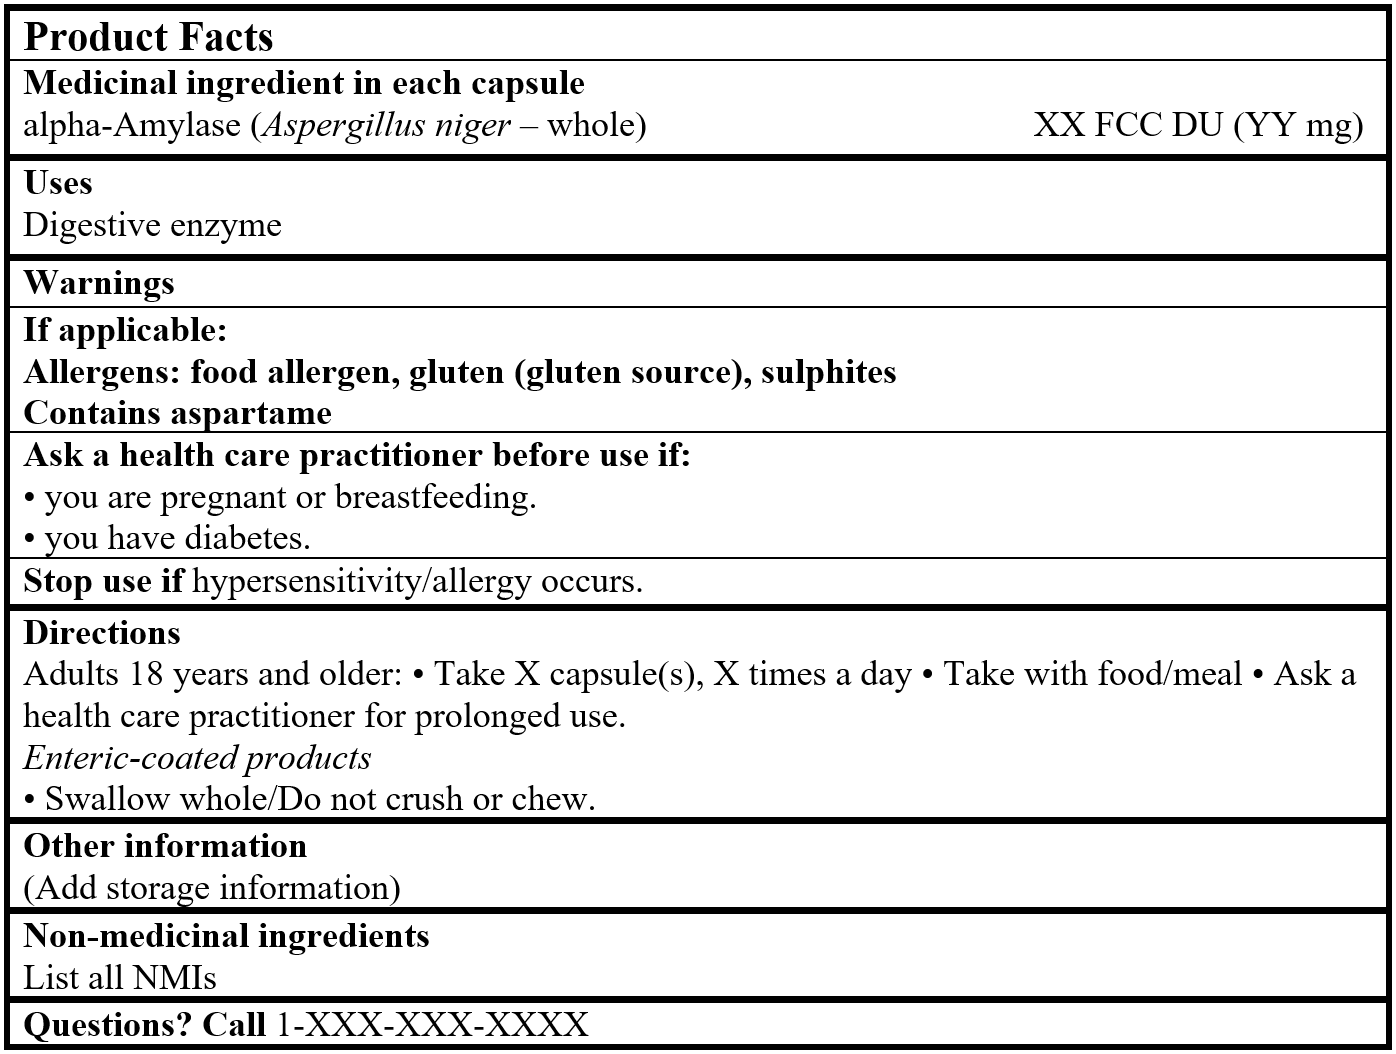 Product Facts Table